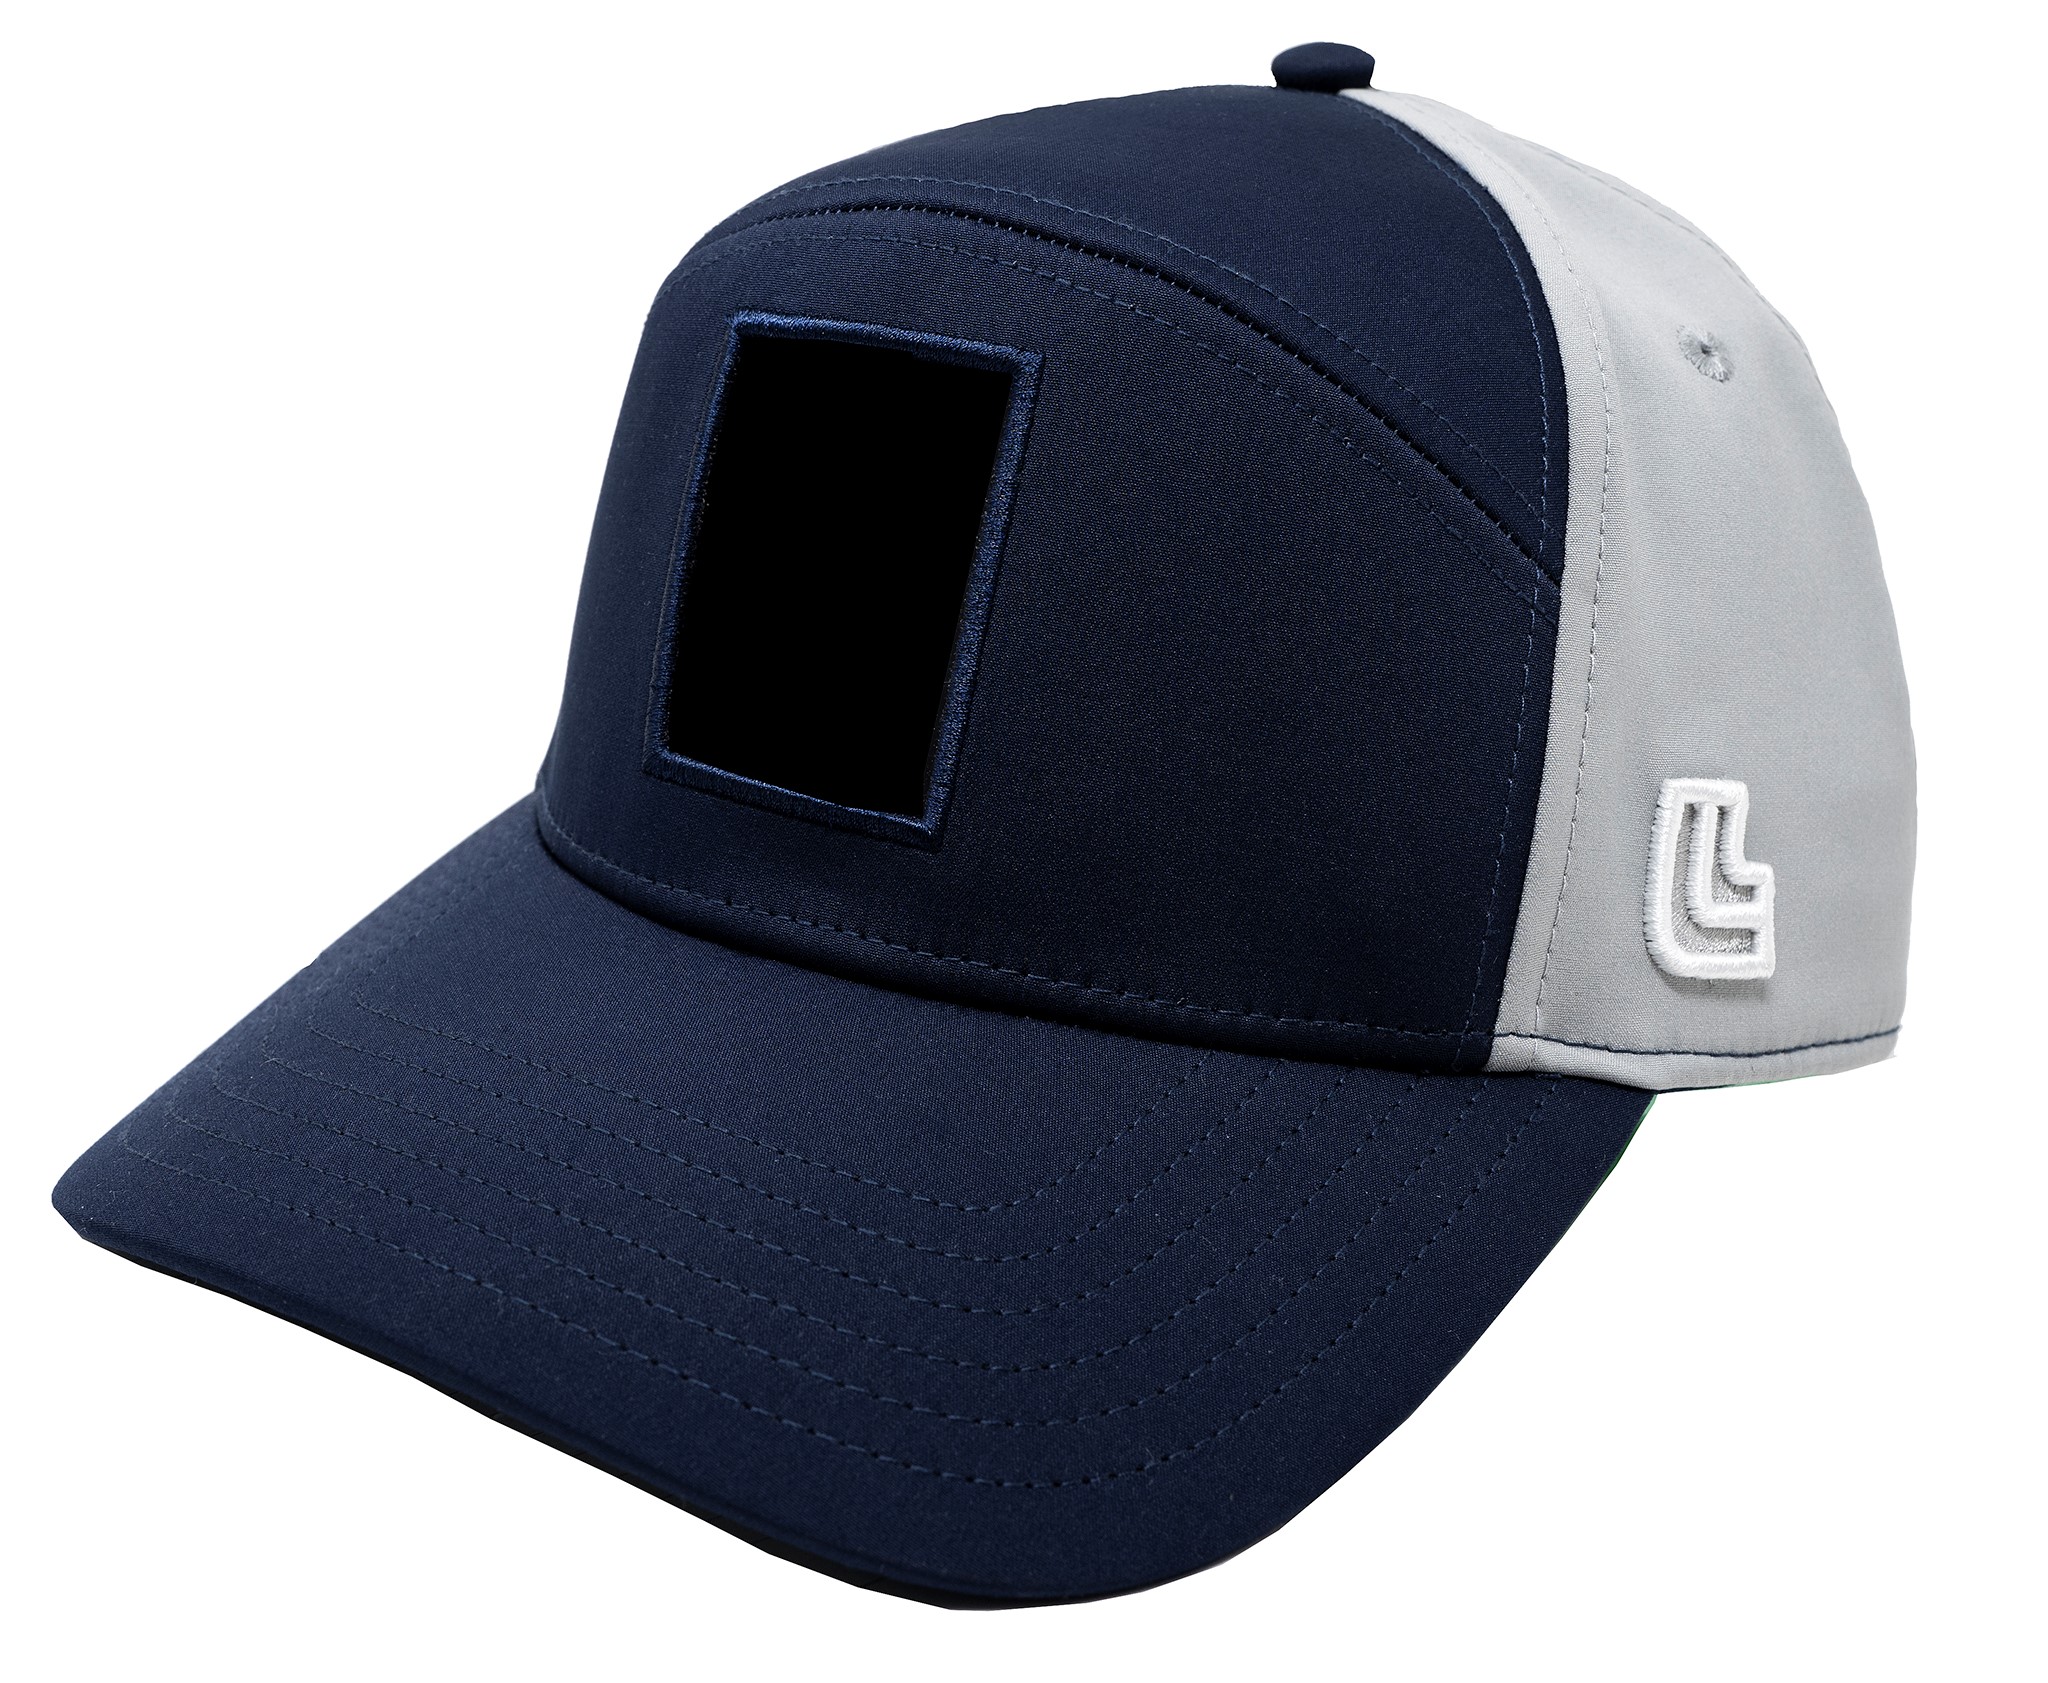 LiveLids Navy/Gray (Curved) $149 (side view)